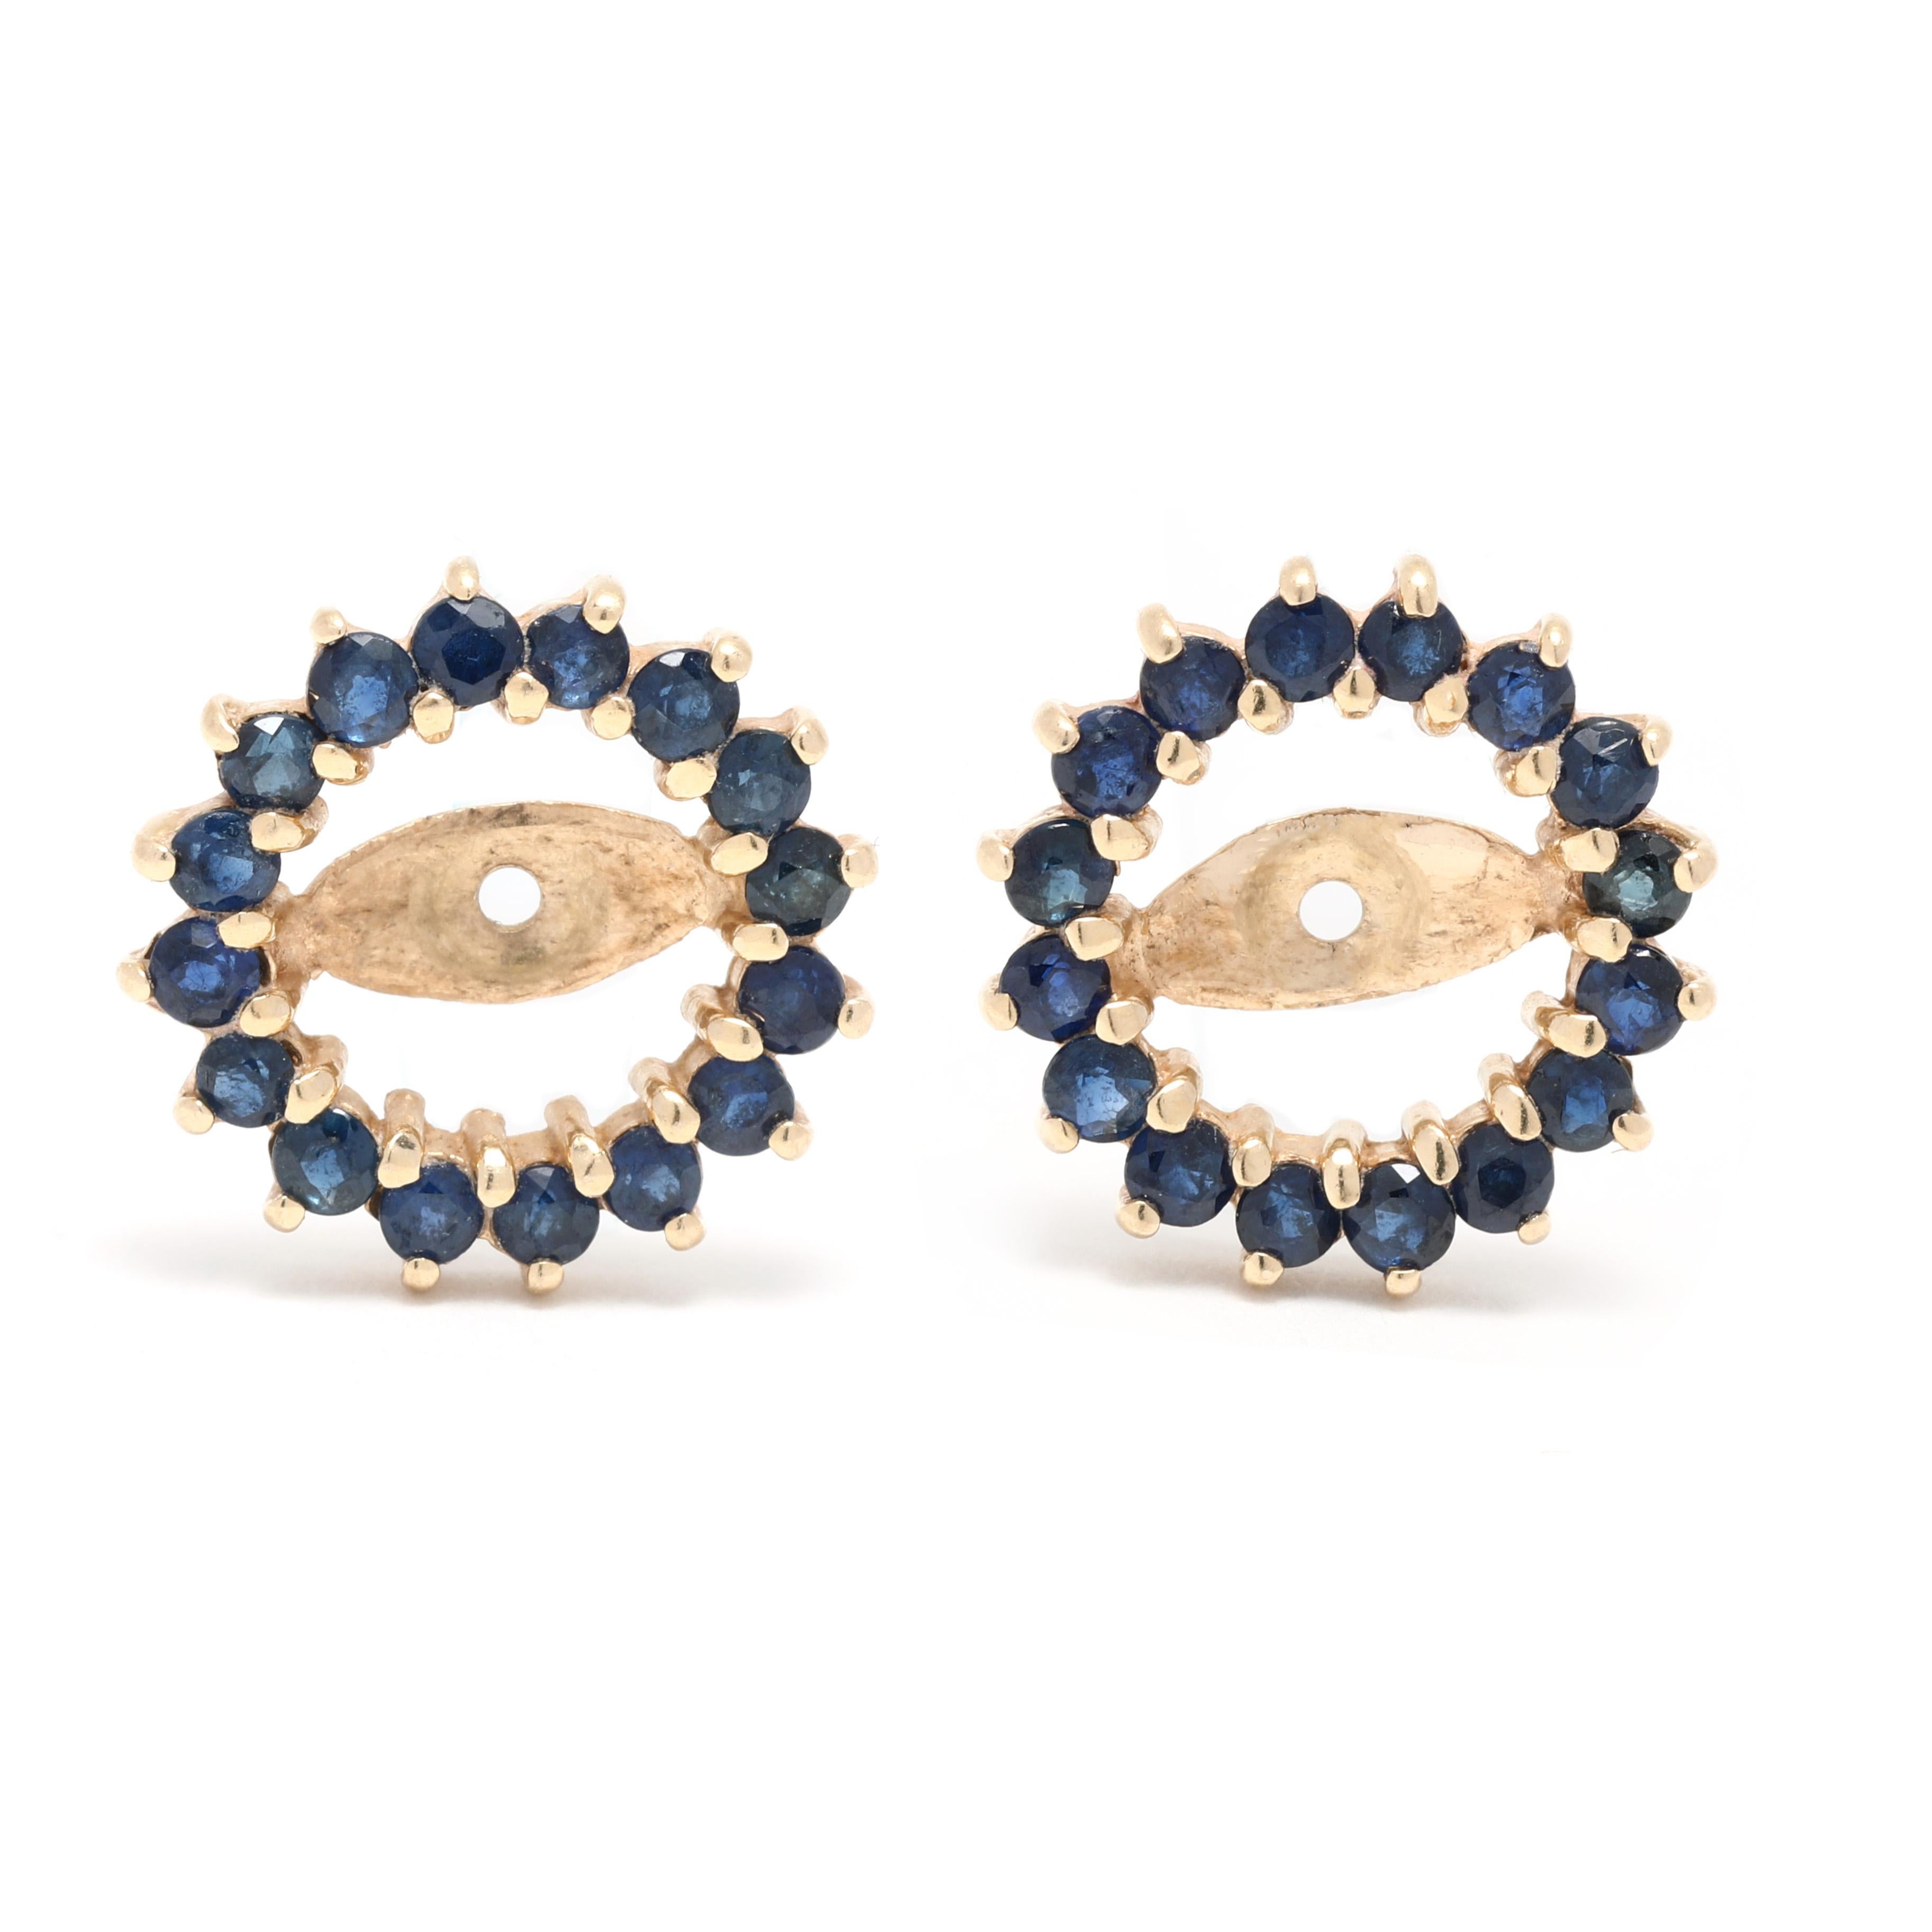 This pair of stunning sapphire earring jackets will make a beautiful addition to your special day. Crafted from 14K yellow gold, these earrings feature 1 carat of dazzling sapphires and measure 1/2 inch in length. Perfect for the 